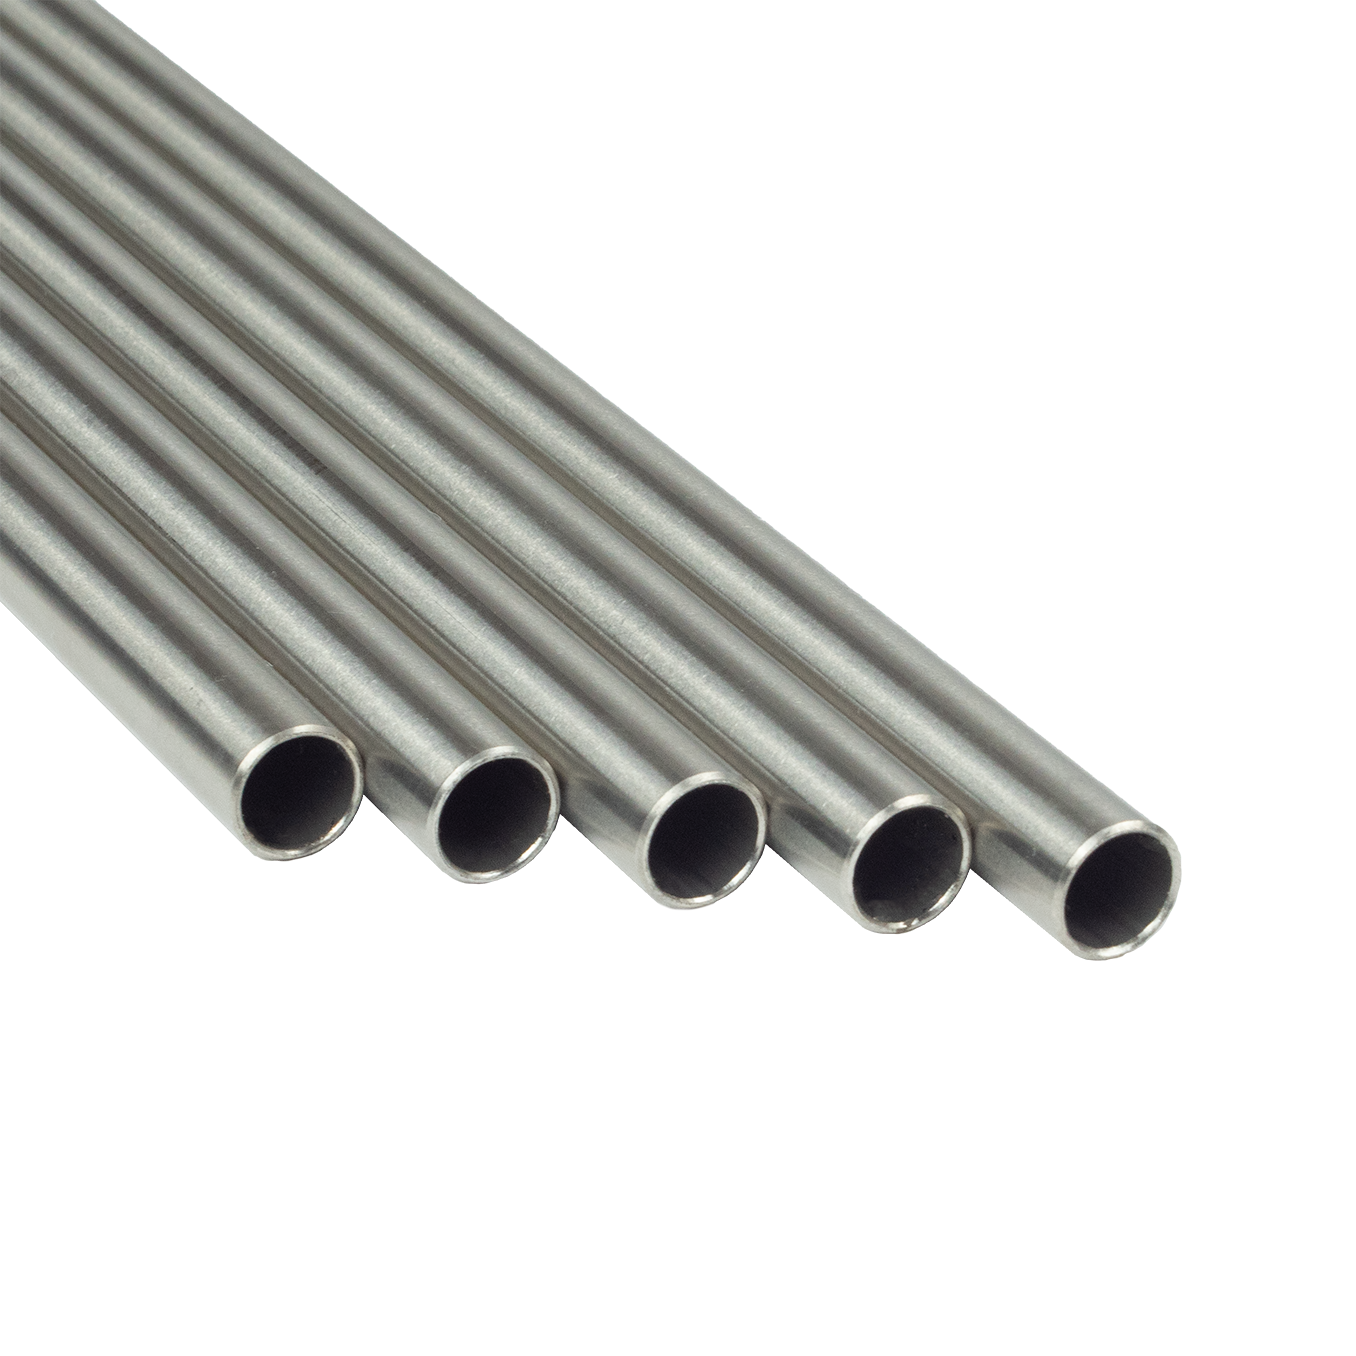 SFS Stand Tube - Ø 10 x 1 mm, length 230 mm - stainless steel